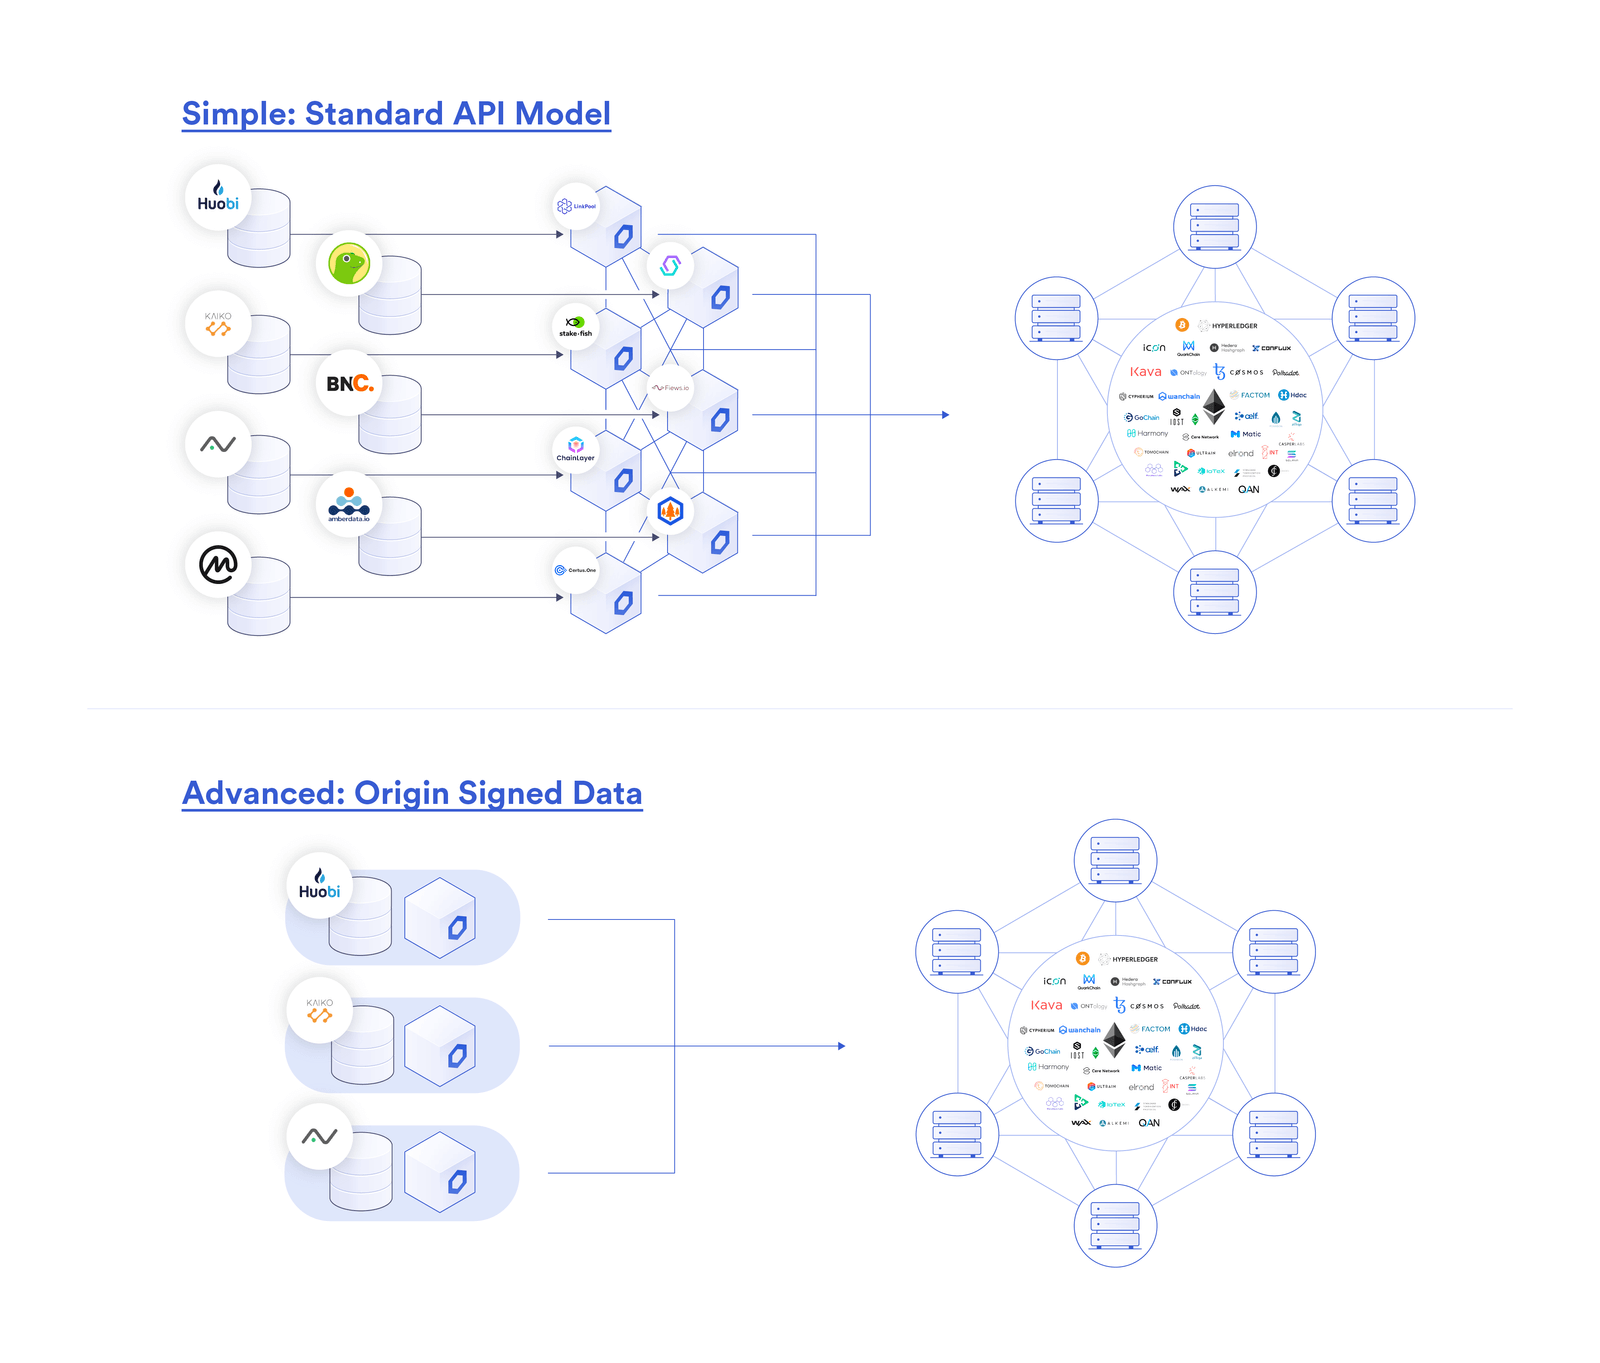 Data providers can monetize their data for the smart contract economy by selling to the Chainlink Network or running a Chainlink Node to sell directly to blockchains.